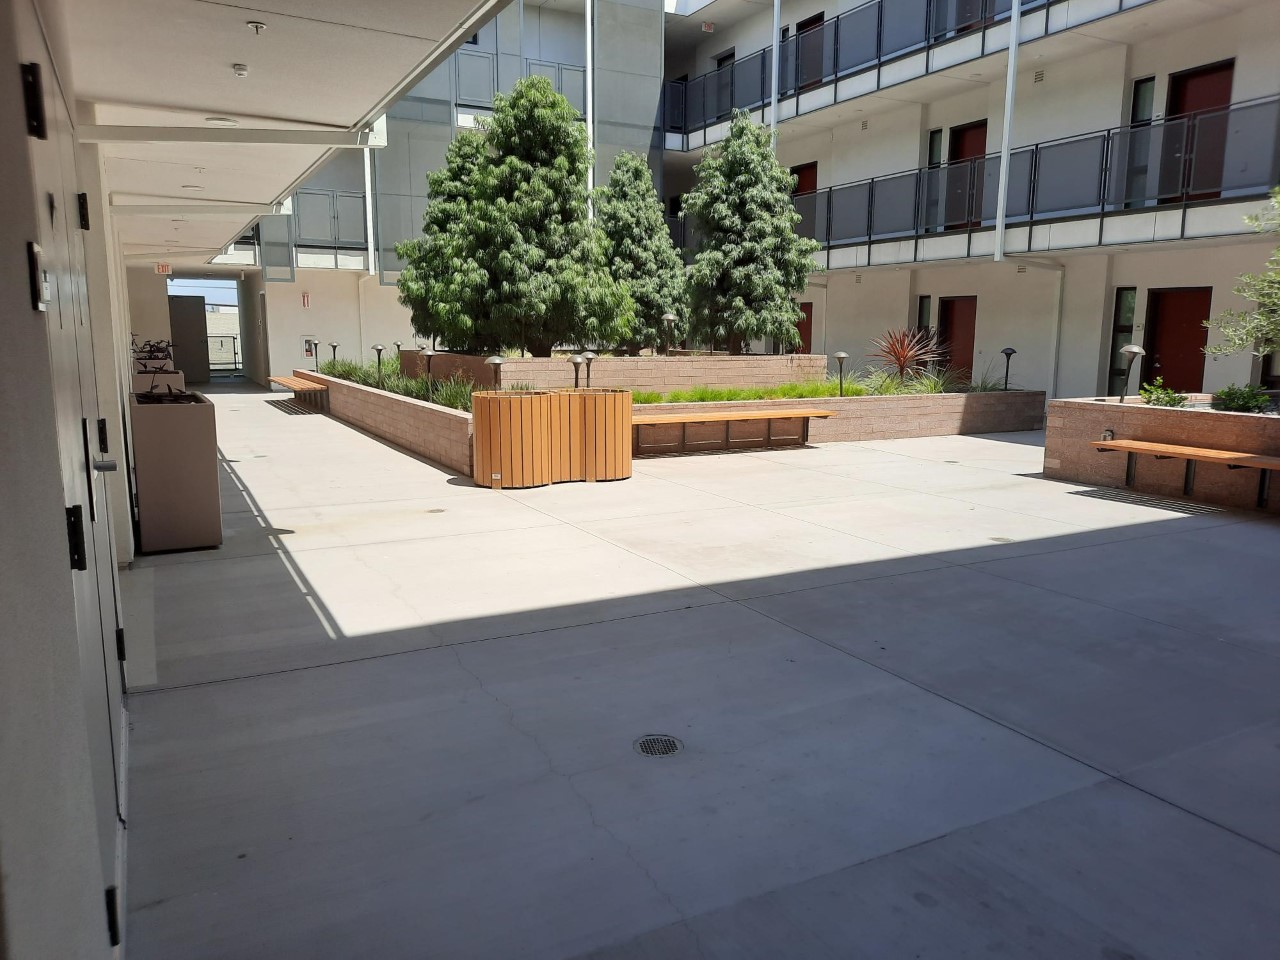 Outdoor patio area located at the center of the building. There are four trees, surrounded by planters, plants, and lamps with benches and trashcans available.